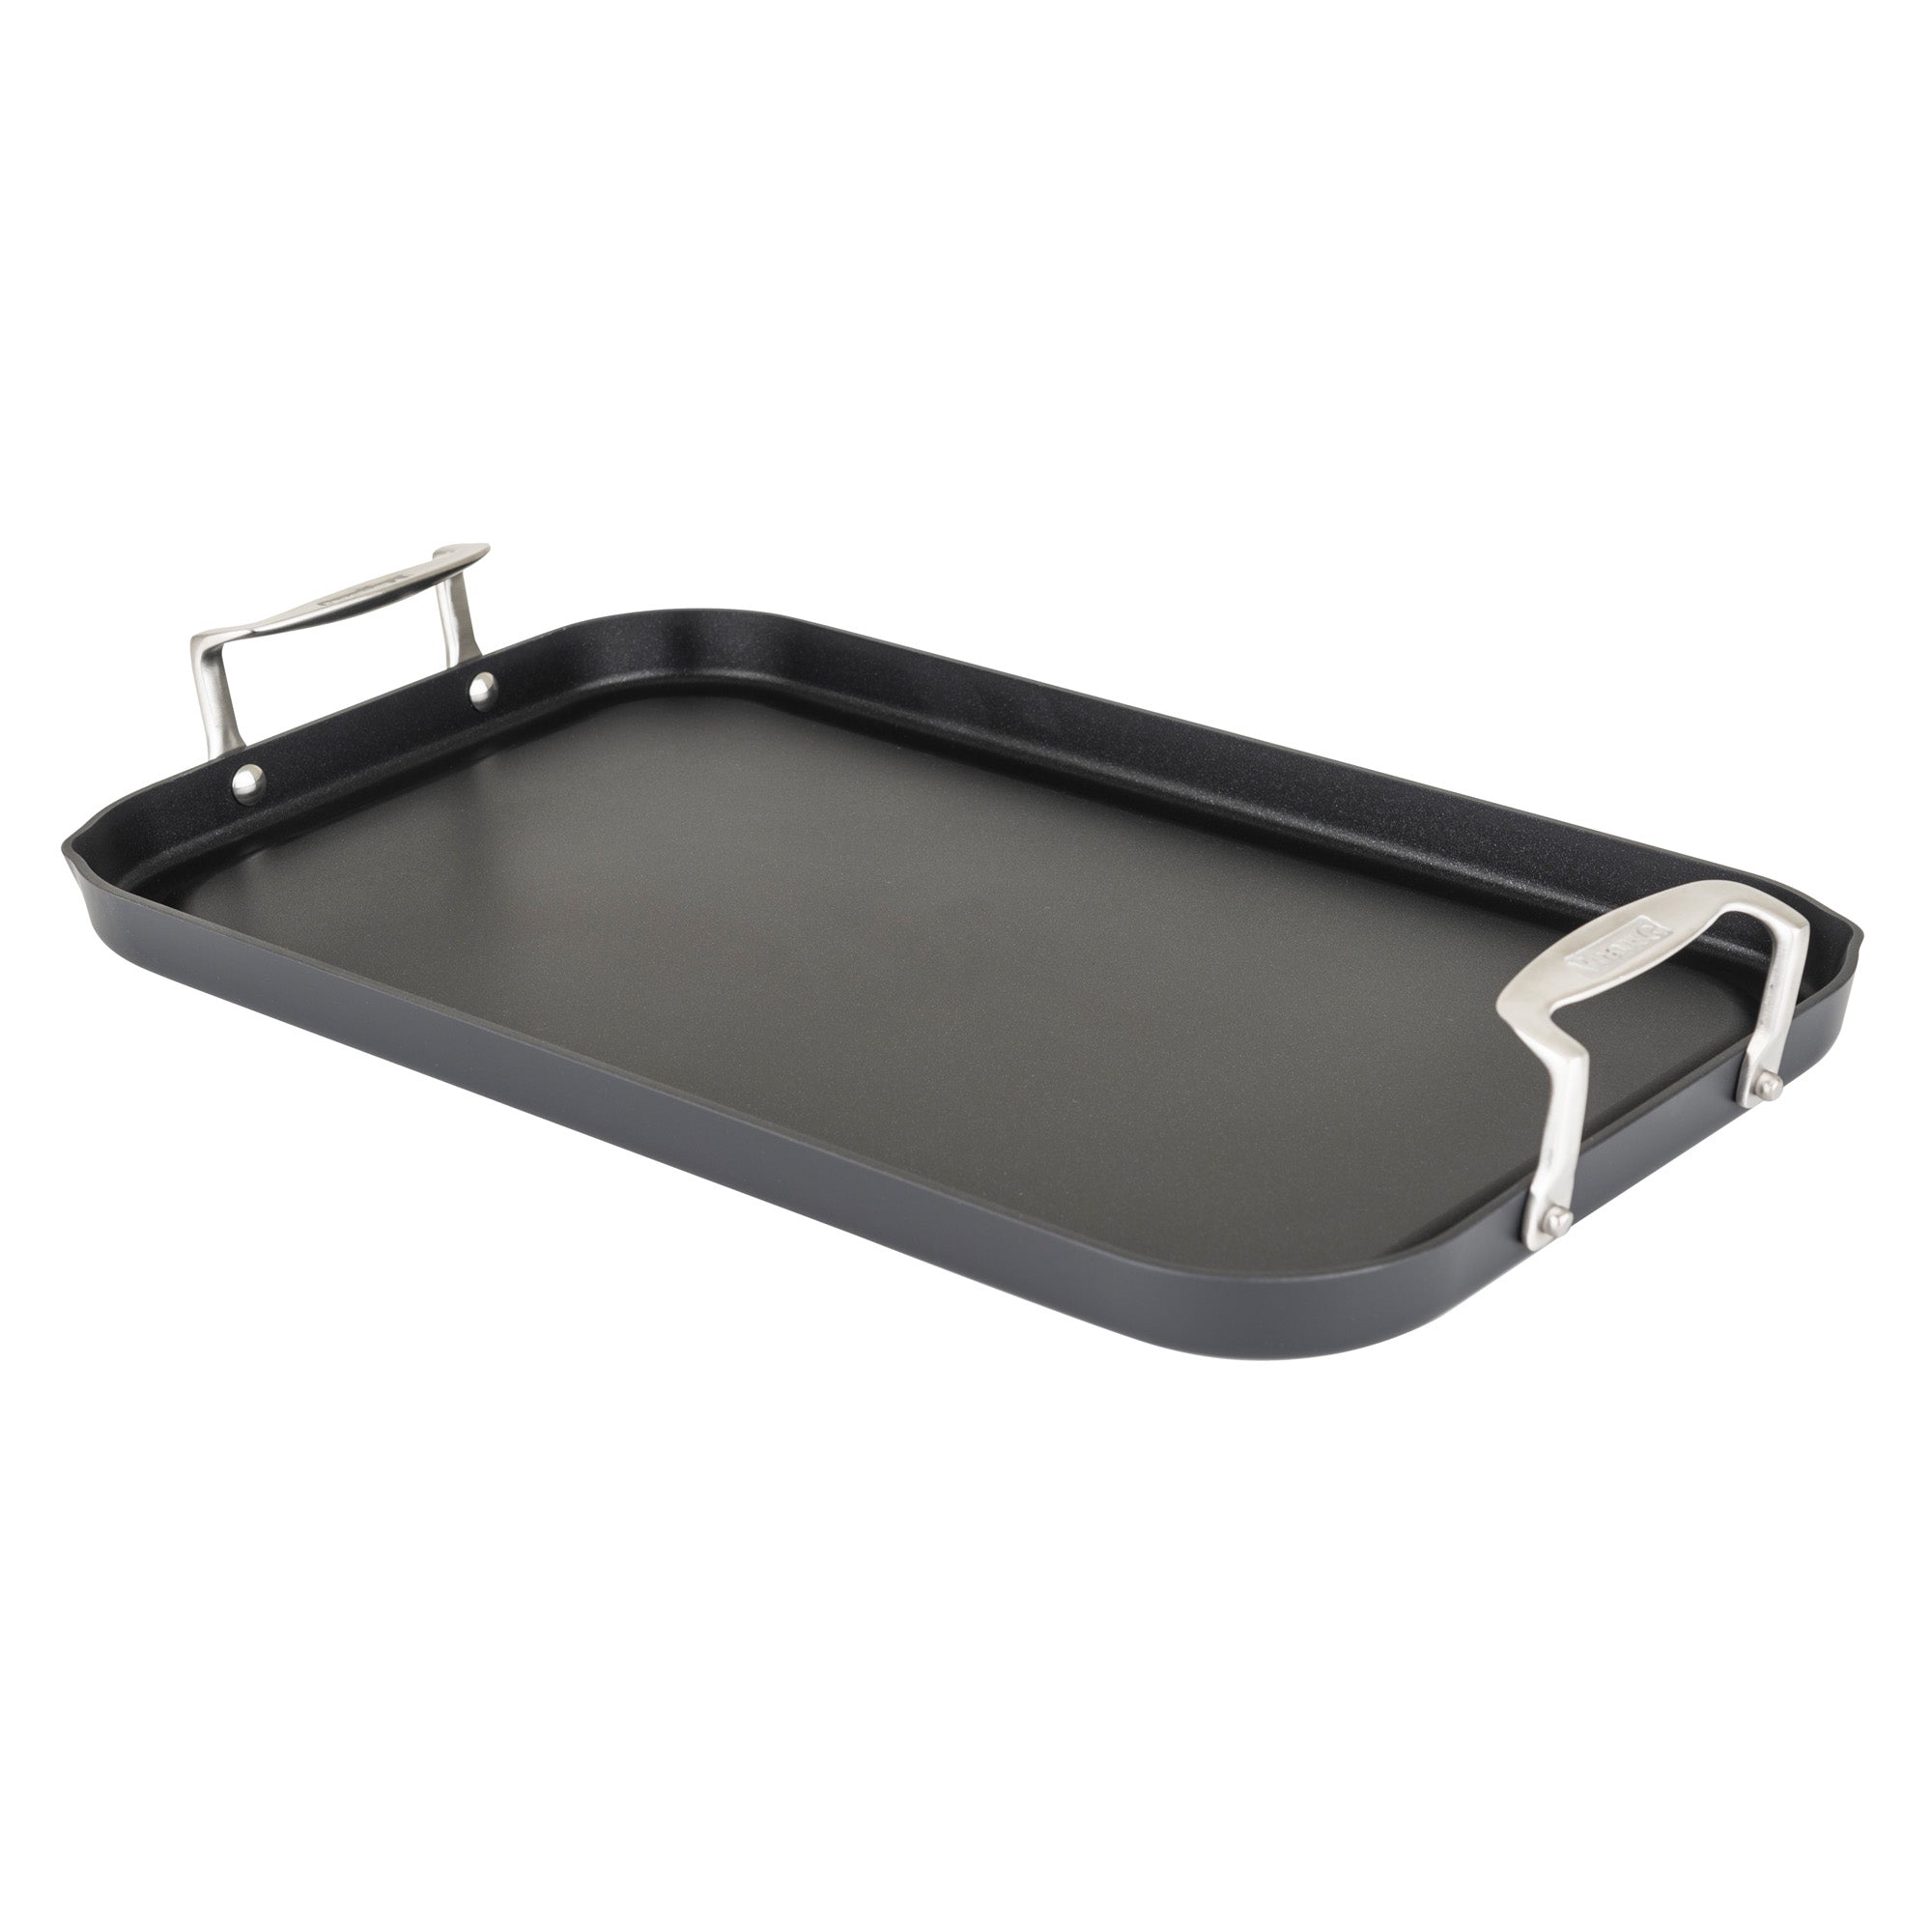 All-Clad HA1 Hard-Anodized Non-Stick Double-Burner Griddle +